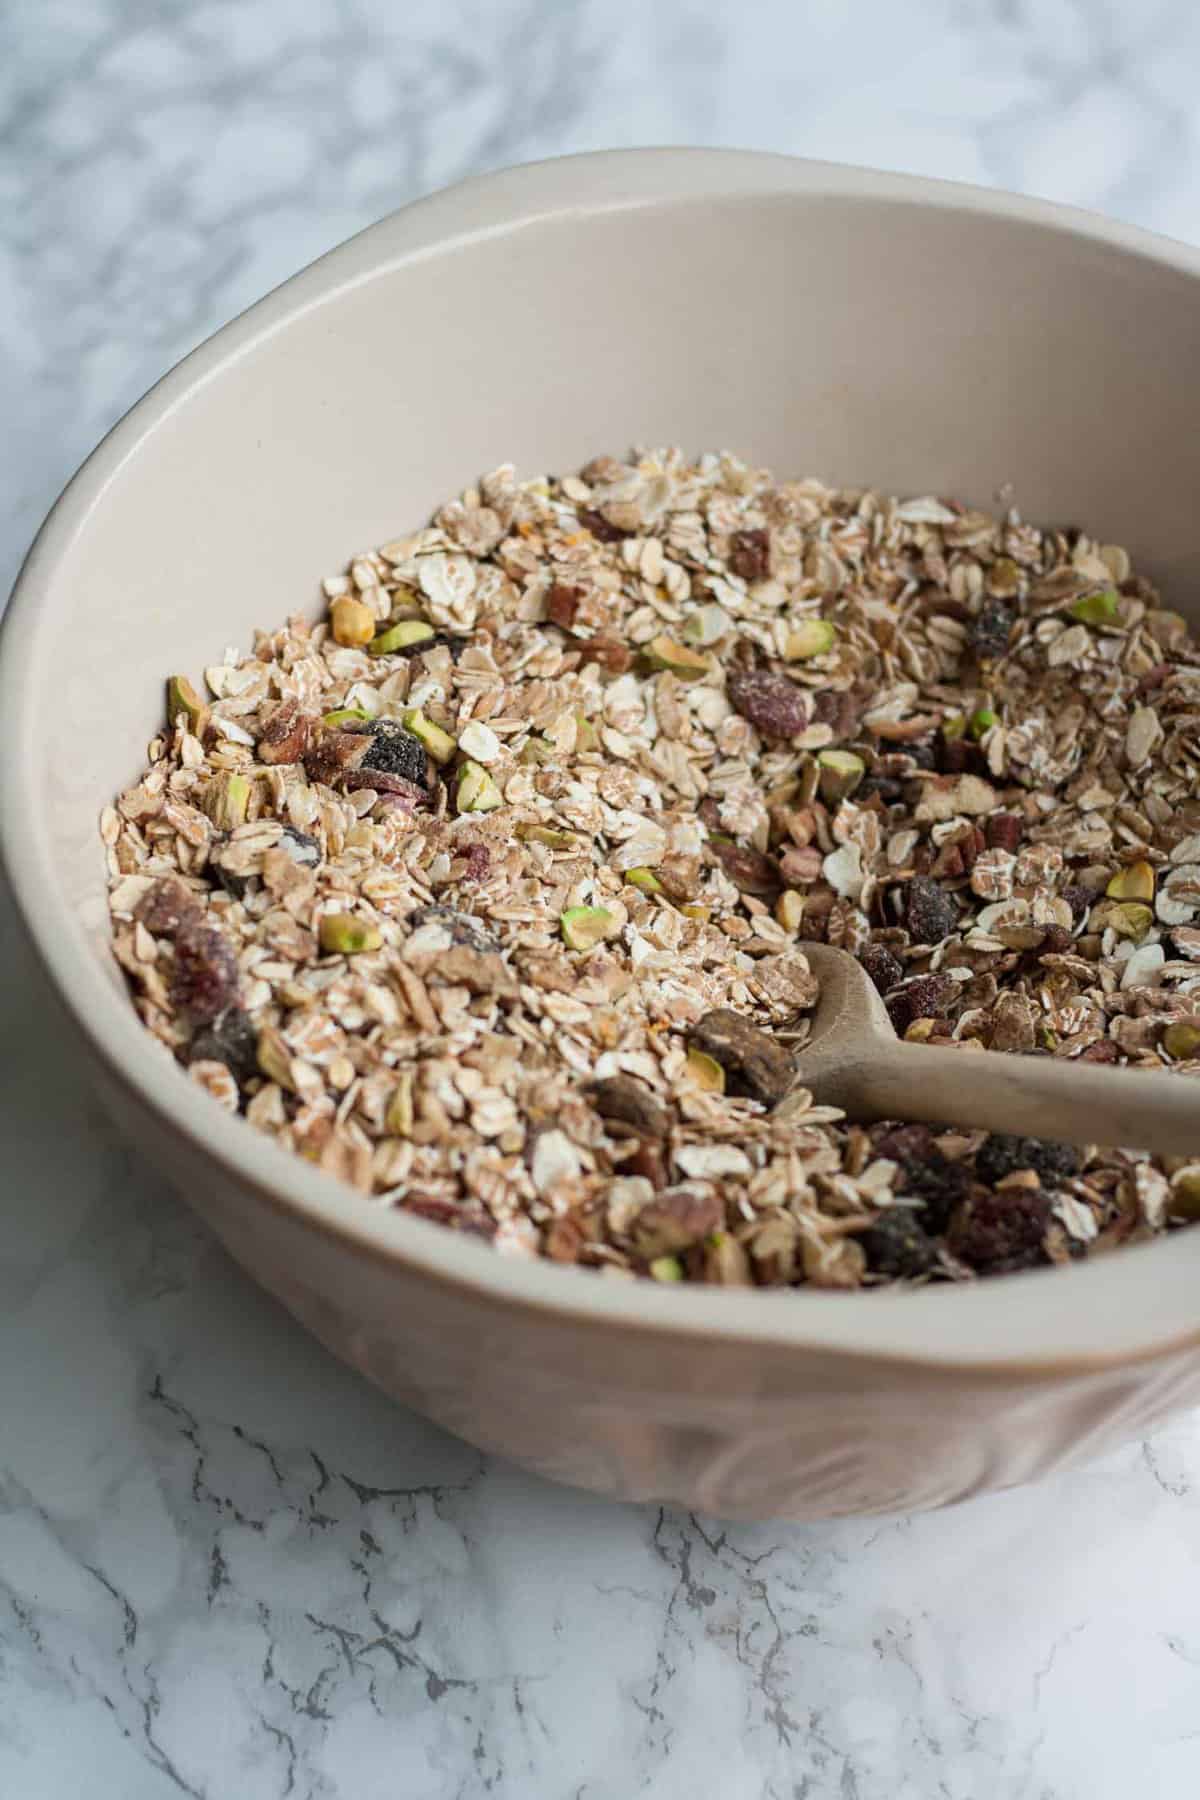 Christmas Muesli - this festive spiced muesli makes for a delicious breakfast and a lovely edible gift! | eatloveeats.com